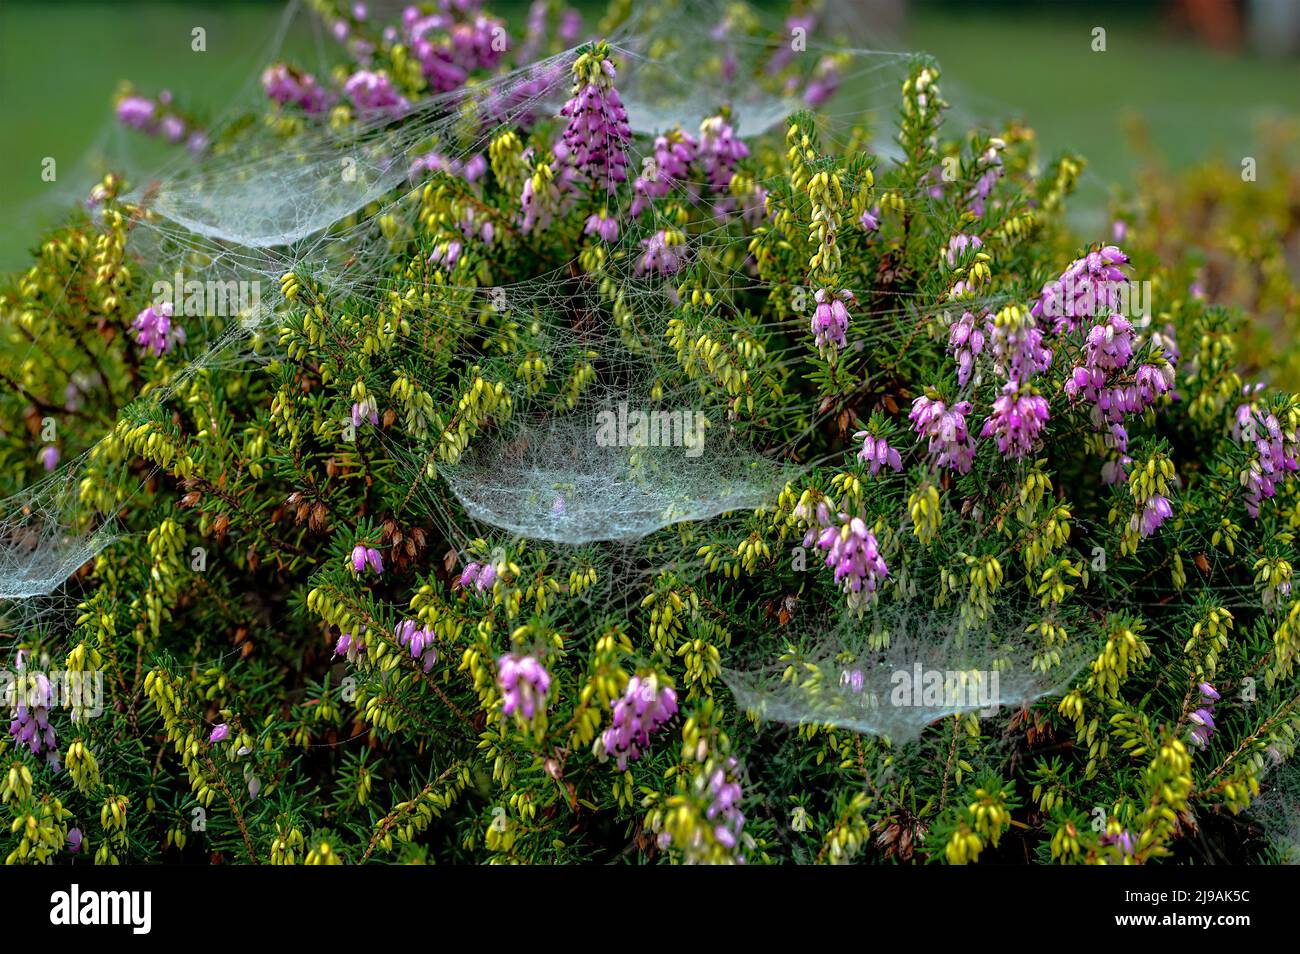 Spider webs and cobwebs are everywhere on trees and shrubs in autumn. Stock Photo